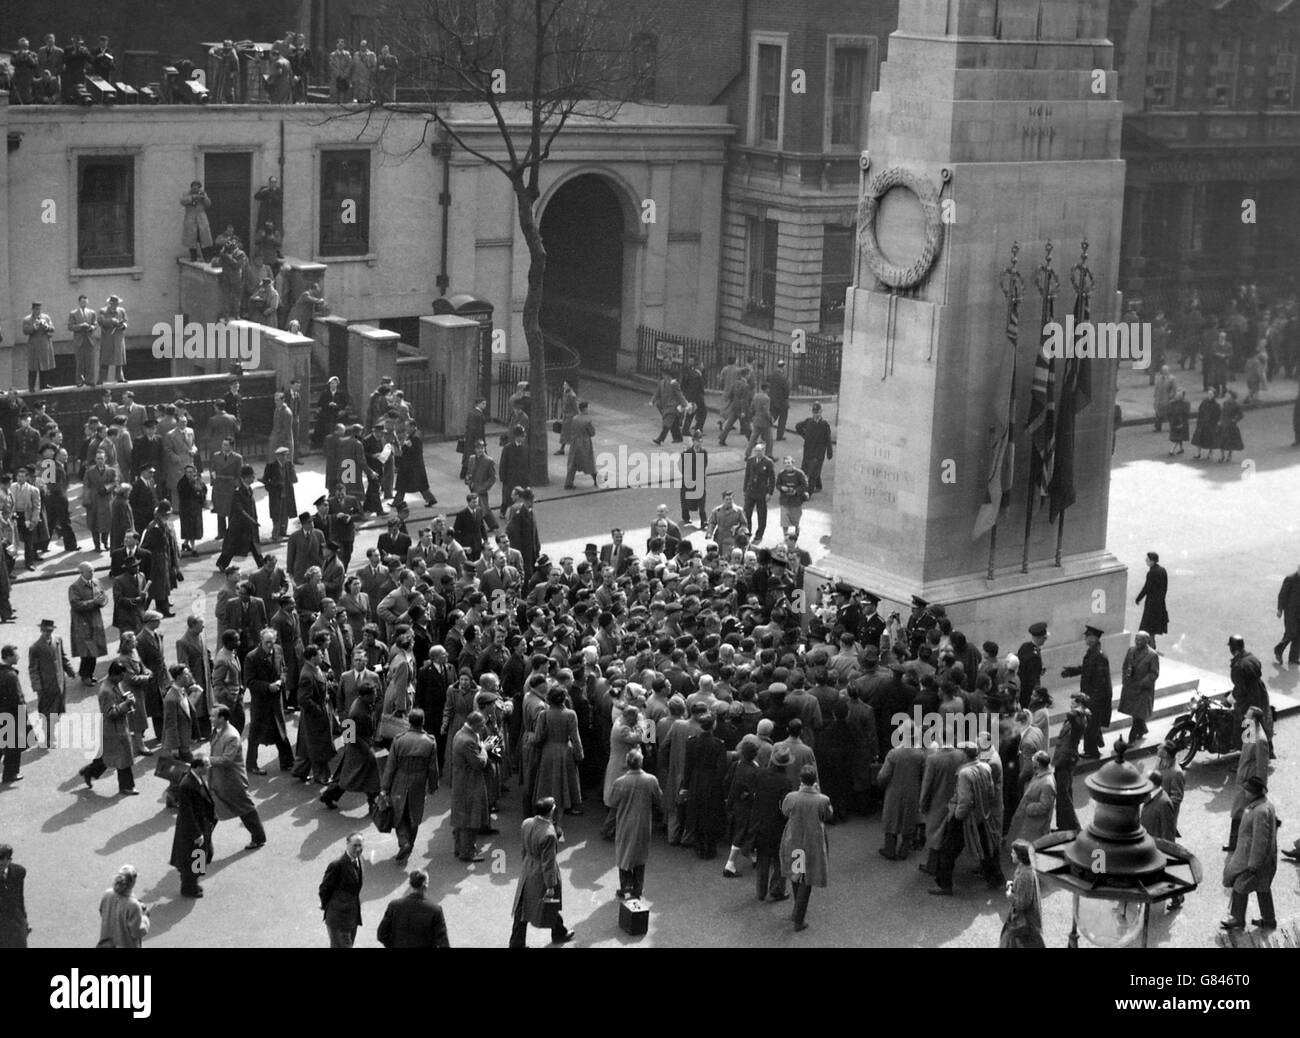 Crowds gather round the Cenotaph in Whitehall, following a visit by Russian leaders Marshal Bulganin and Mr Krushchev, who had laid a wreath there. Stock Photo